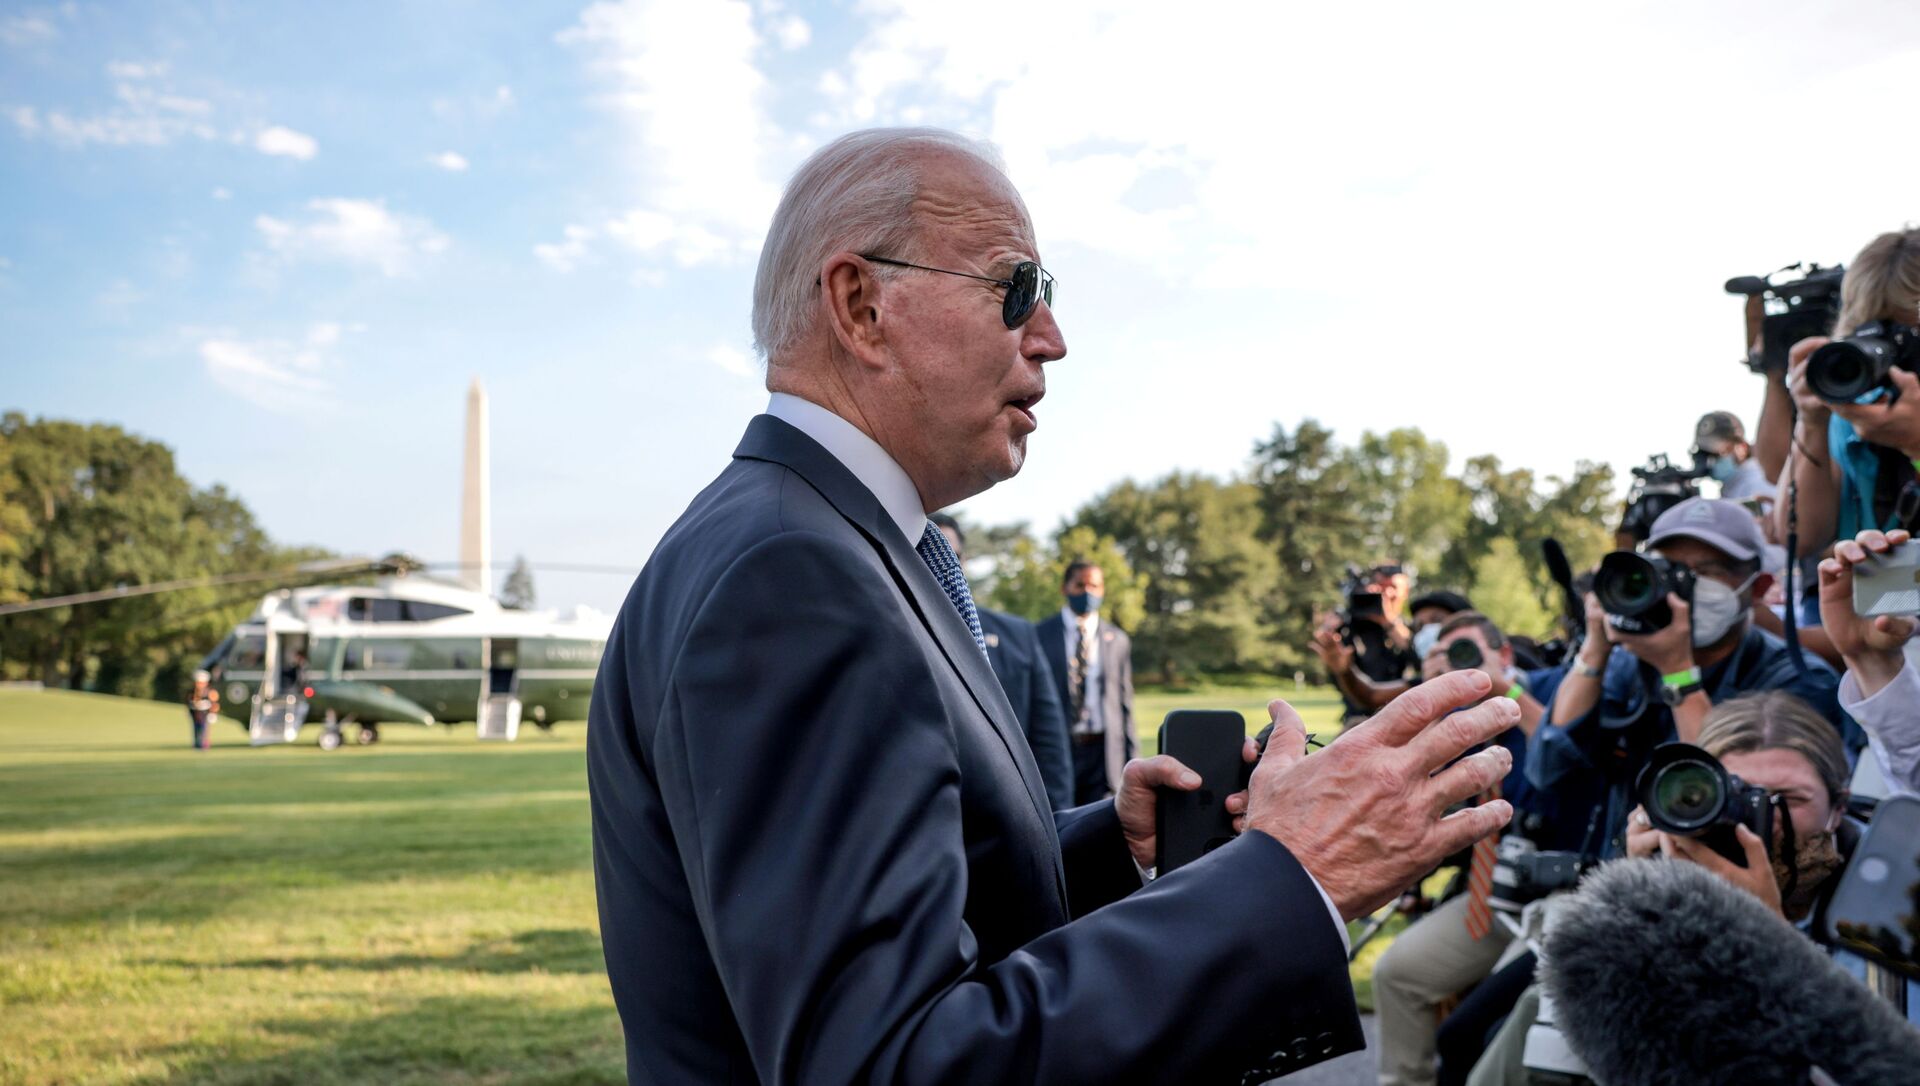 U.S. President Joe Biden speaks to reporters outside the White House in Washington, U.S., before departing the White House for a weekend in Camp David, July 30, 2021. REUTERS/Evelyn Hockstein - Sputnik International, 1920, 01.08.2021